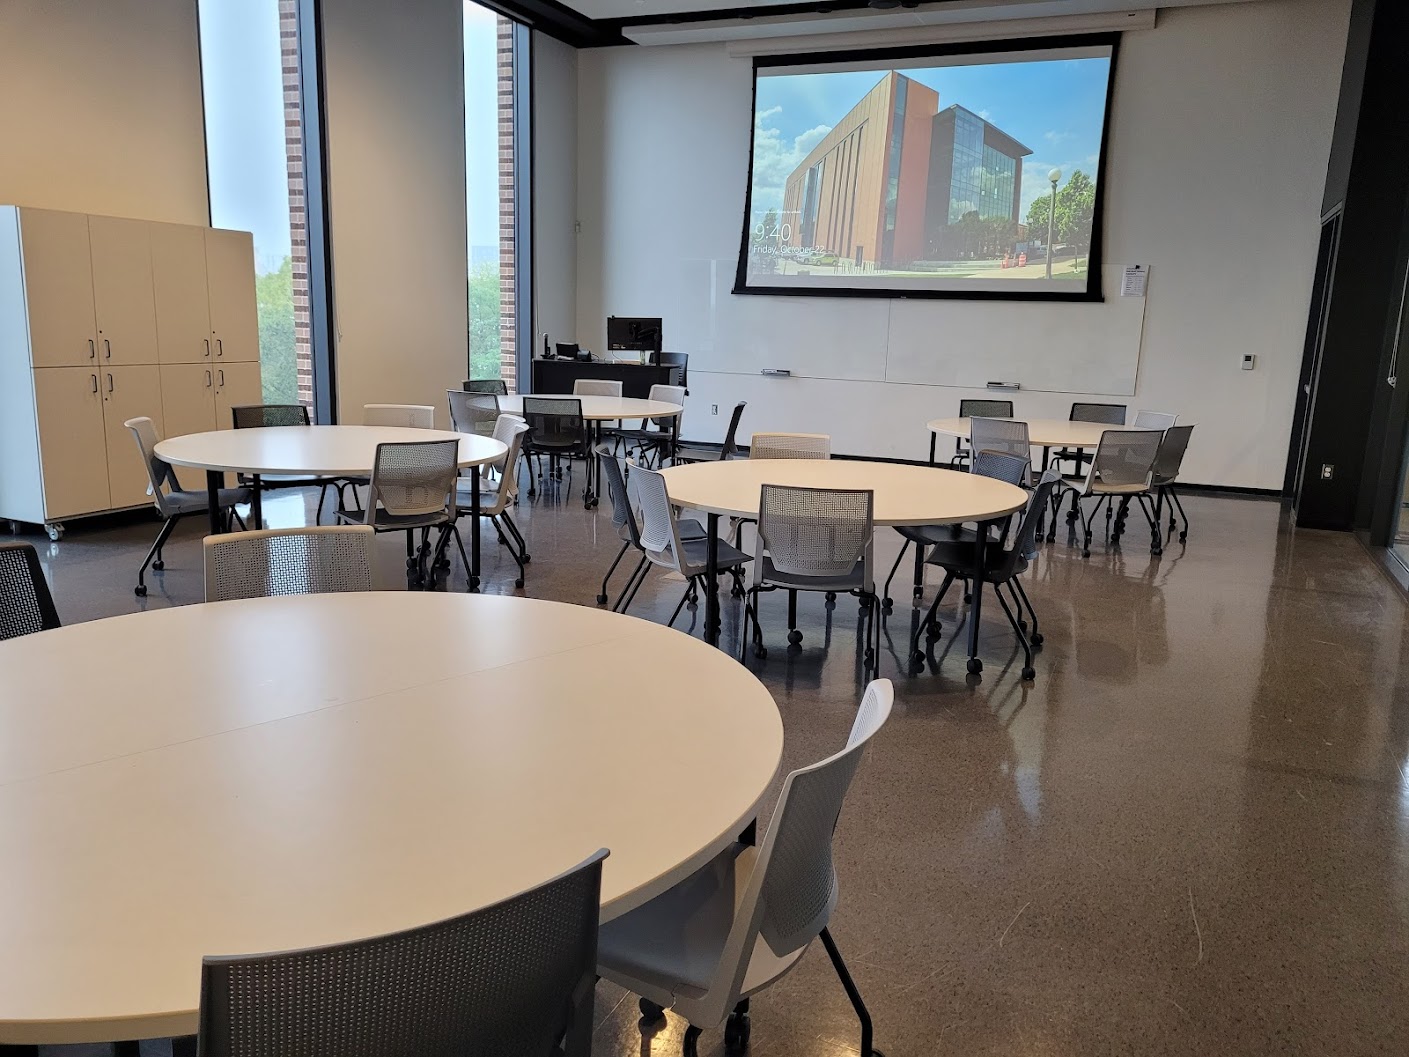 This is a view of the room with student desks, a front lecture table, and a glass board.